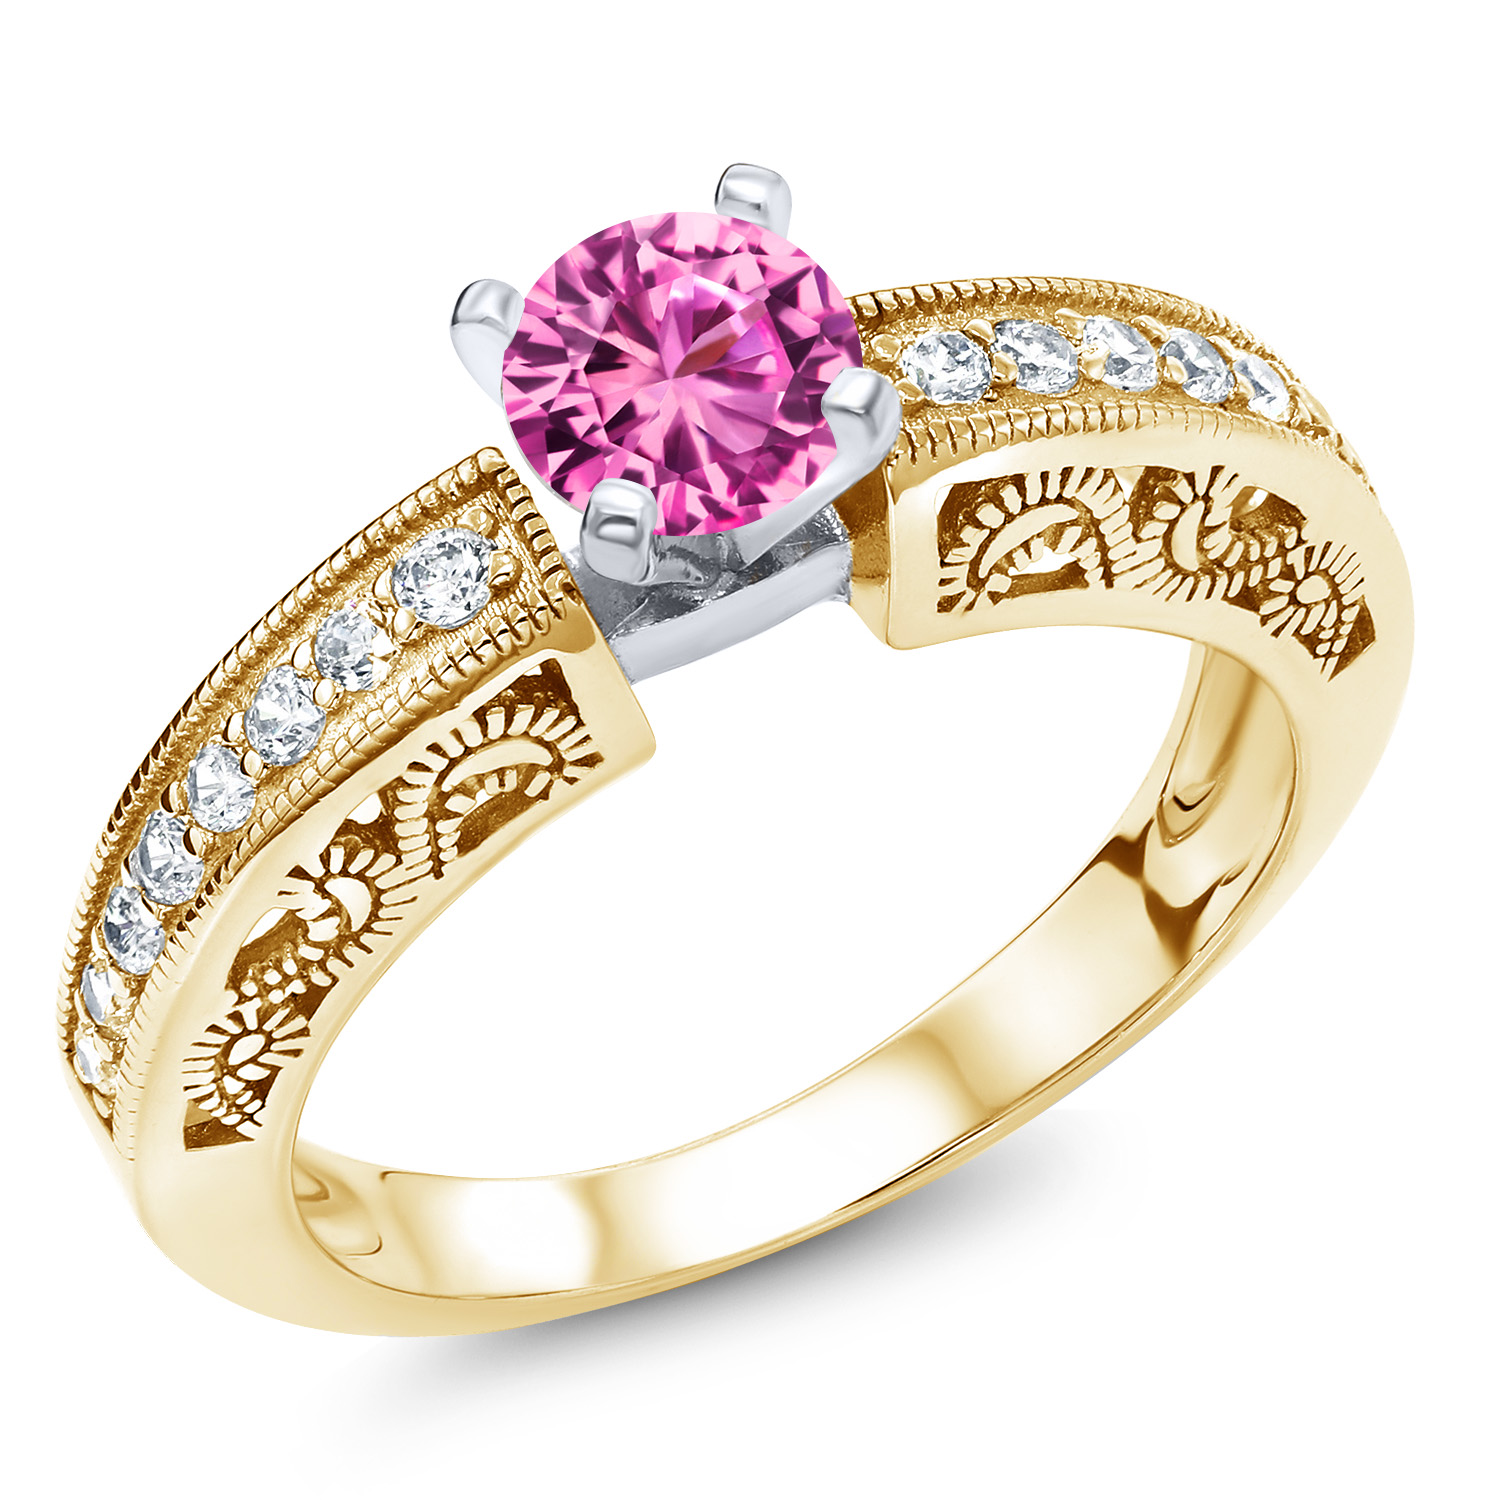 Gem Stone King 1.59 Ct Round Pink Created Sapphire 18K Two-Tone Sterling Silver Ring